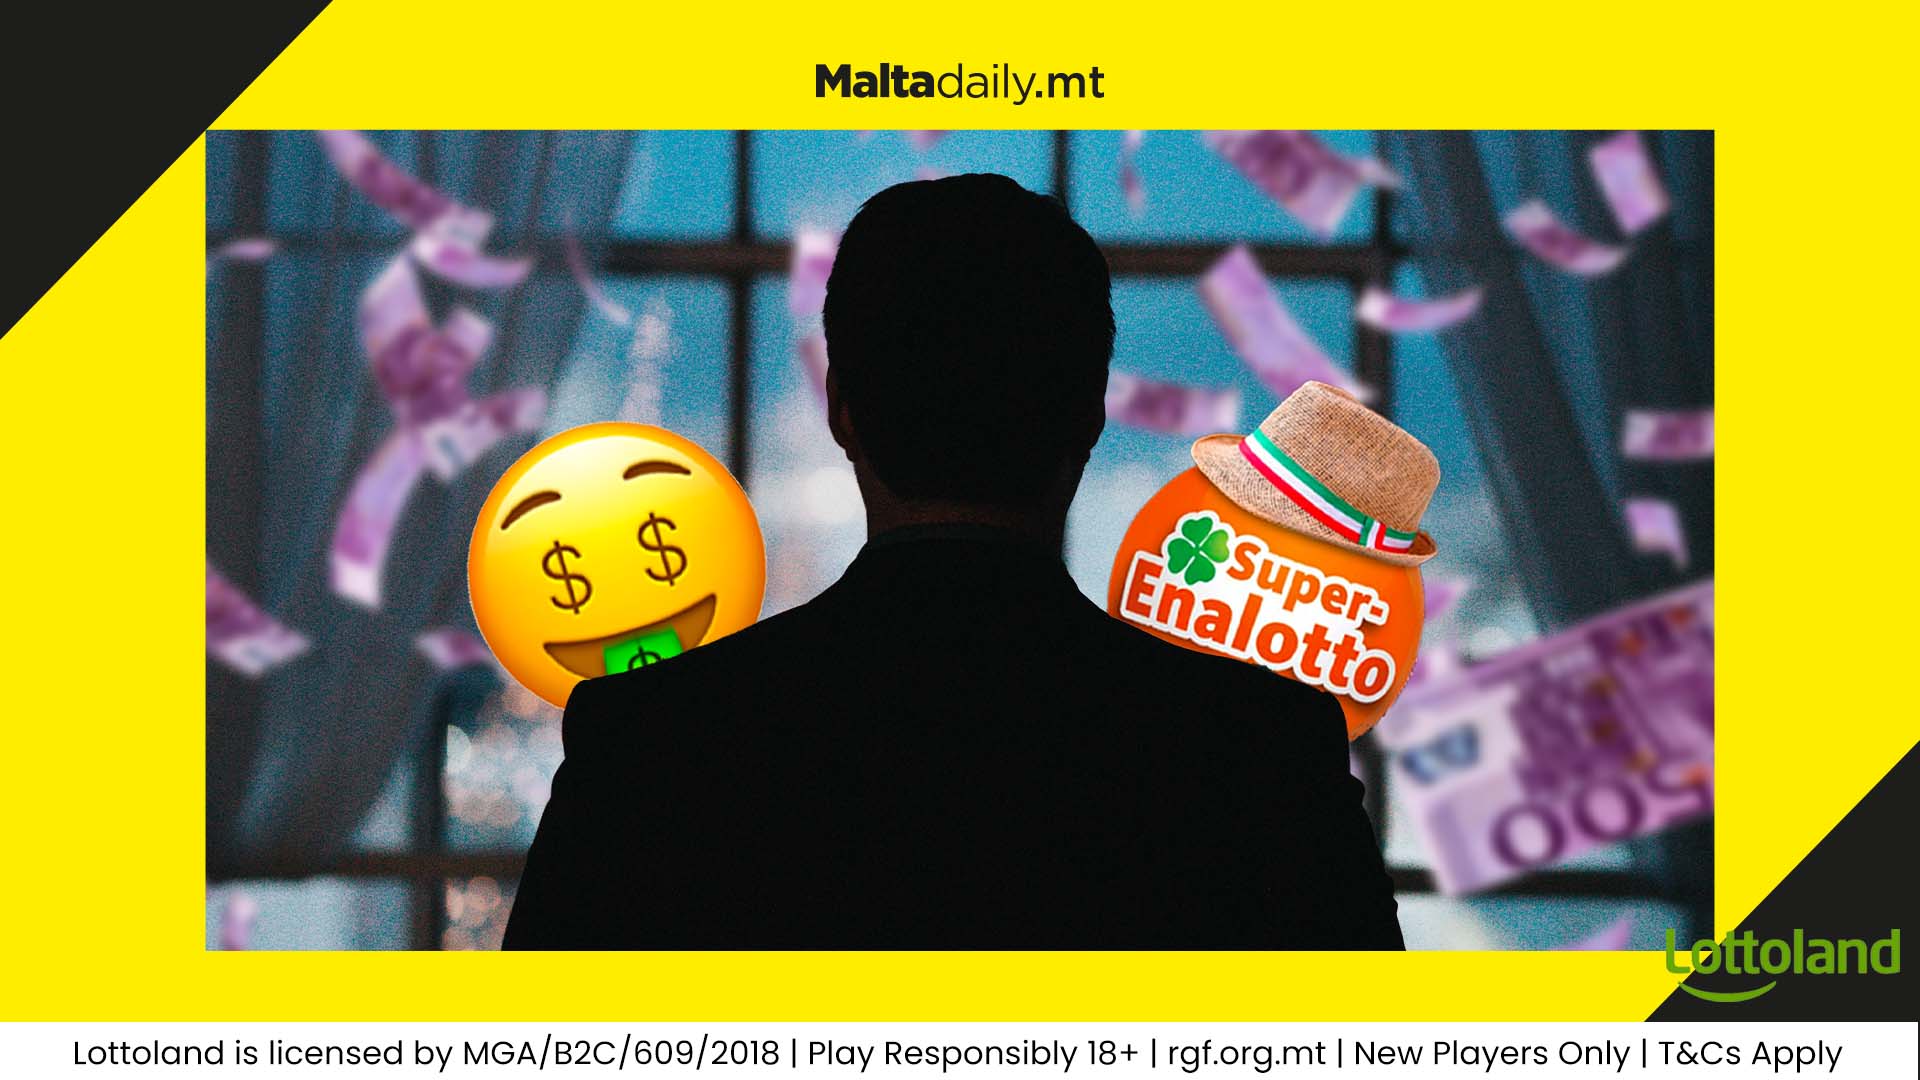 Italy’s SuperEnalotto approaches the €300 Million mark